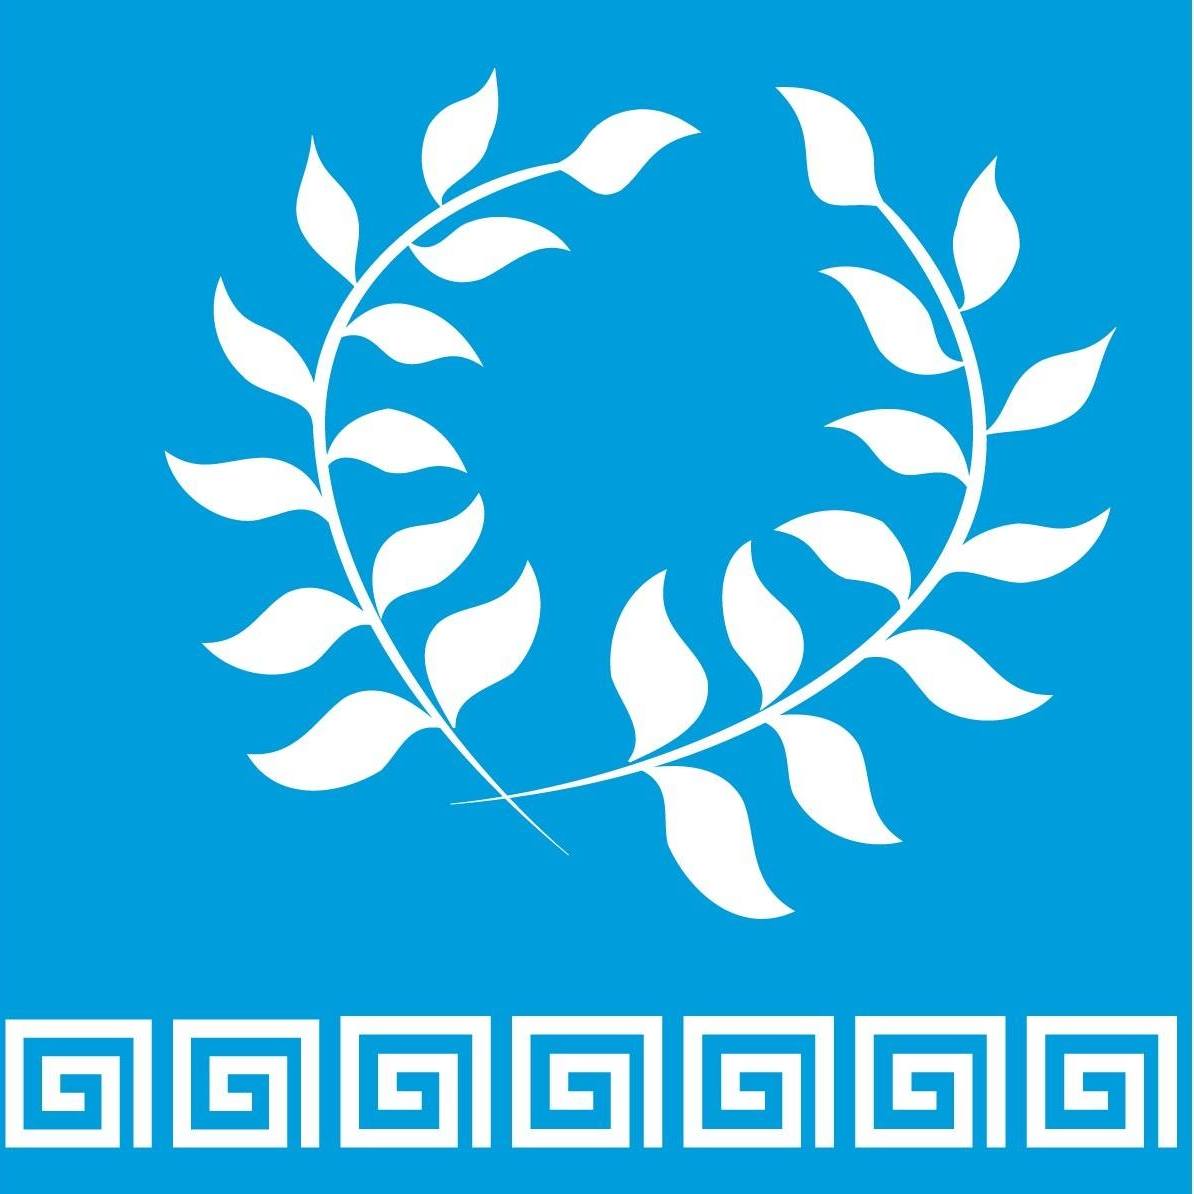 Greek Speaking Organization in USA - Hellenic Cultural Center of the Southwest